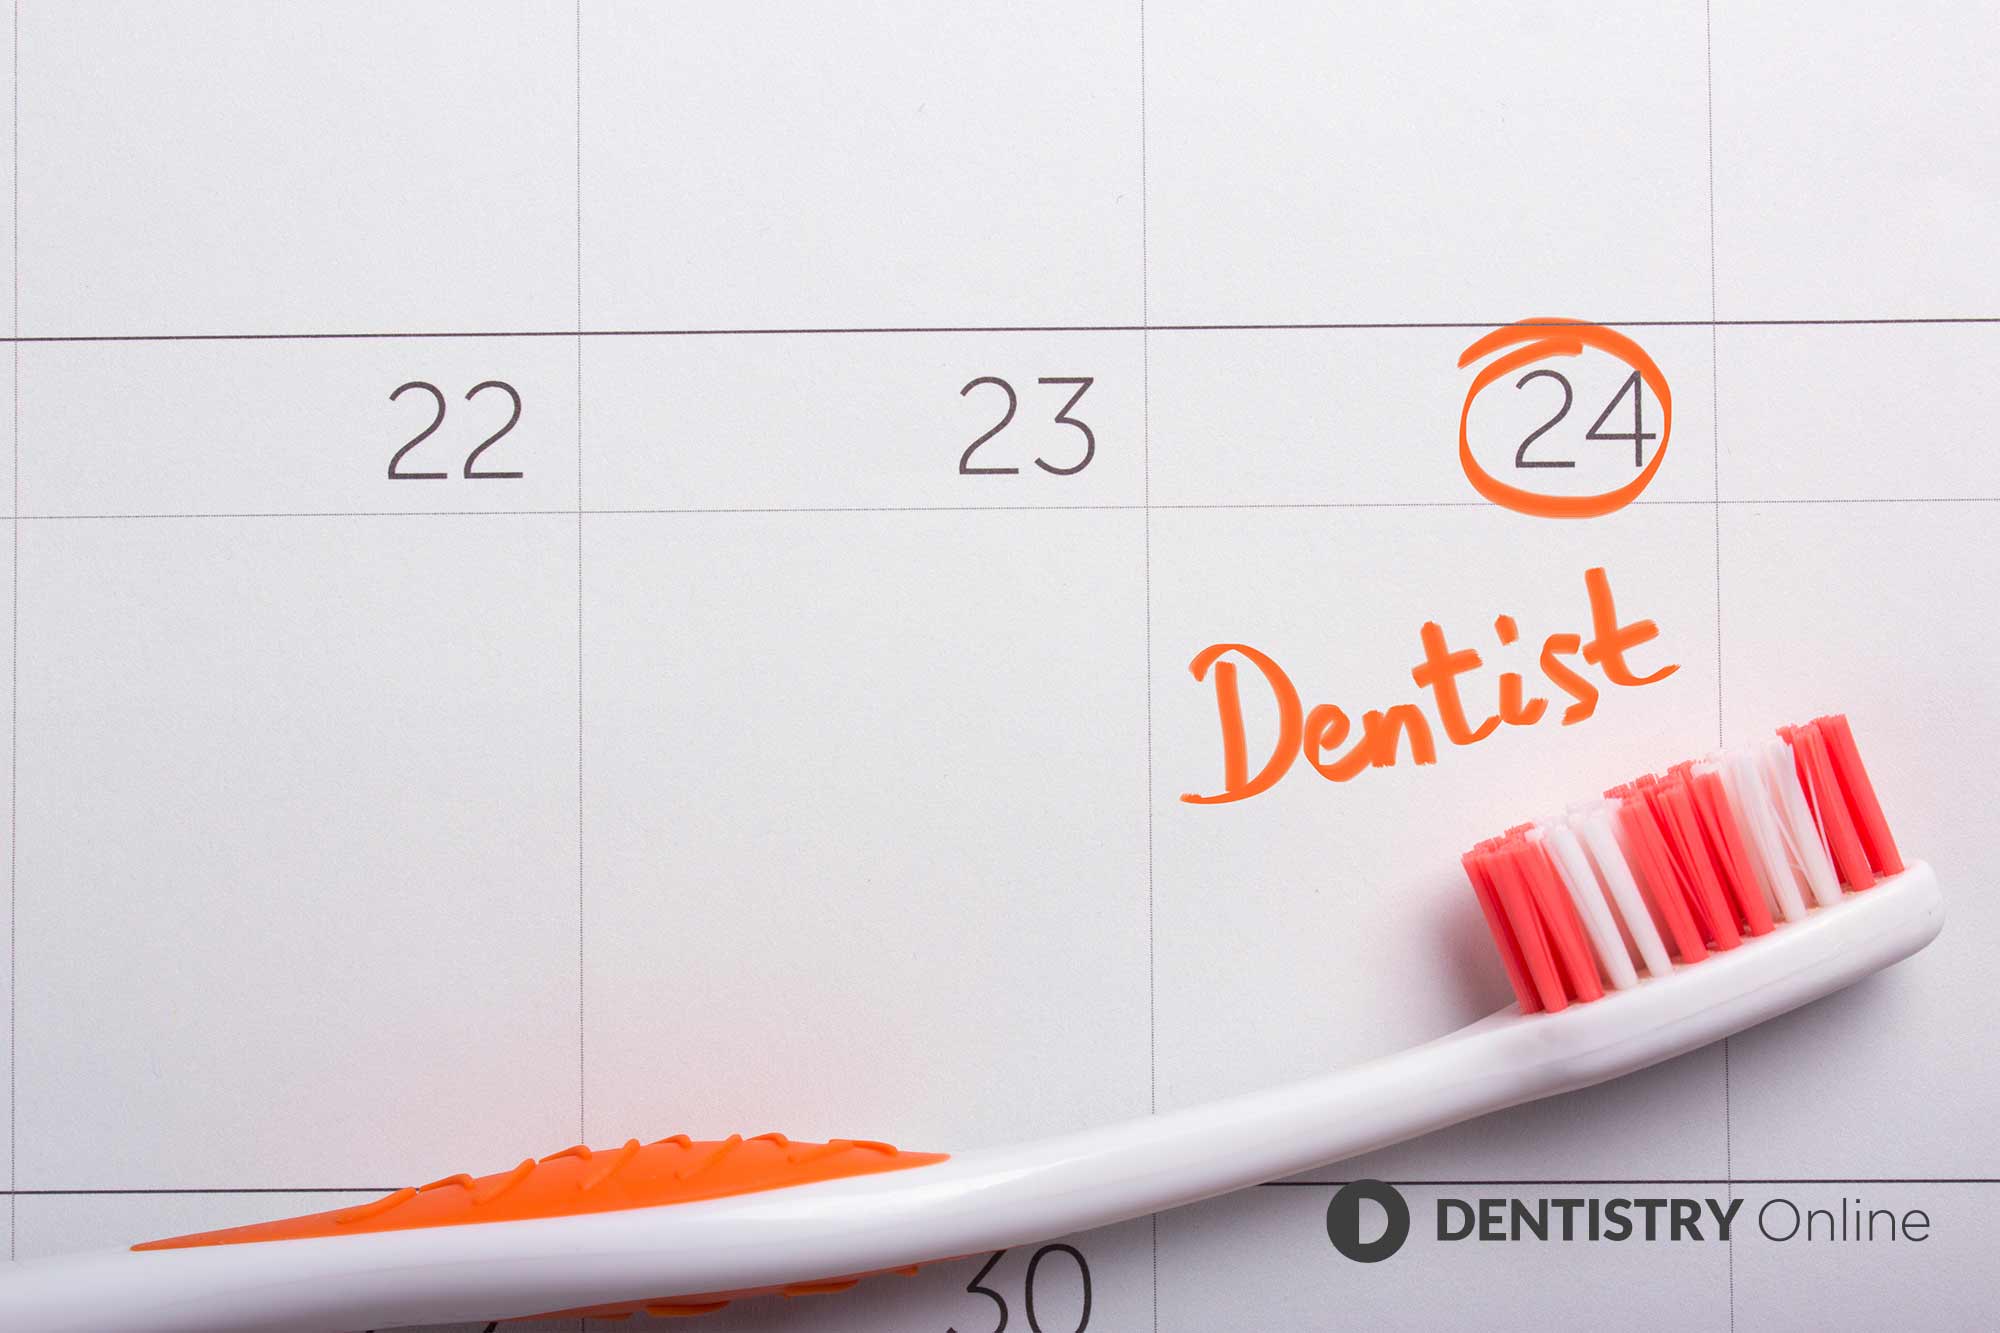 The dental profession is calling on urgent government support amidst reports that 19 million dental appointments have been missed since March